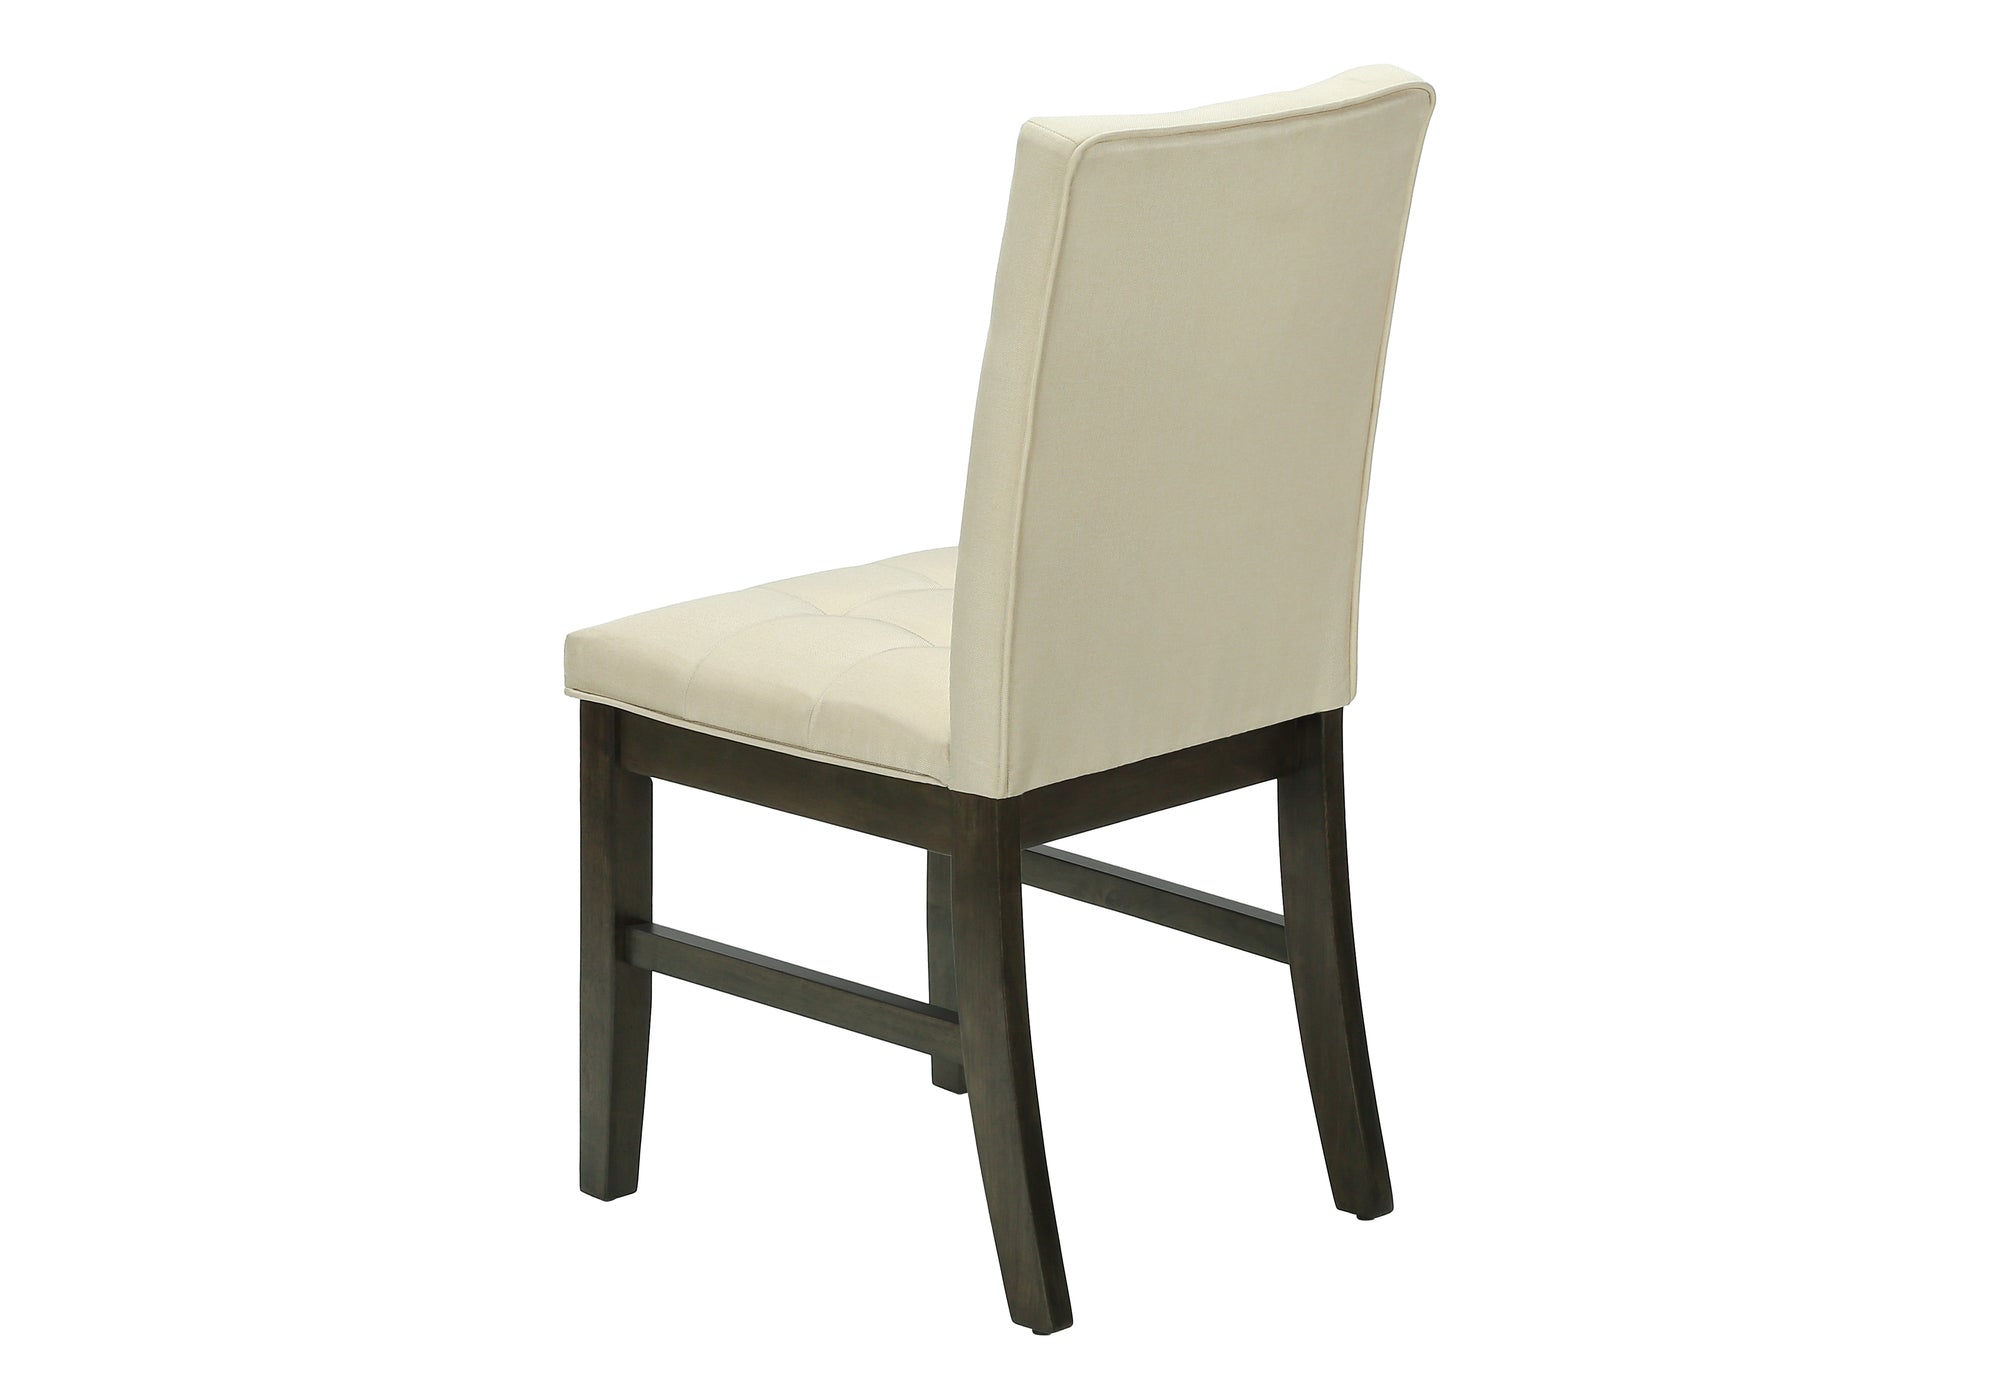 MN-371376    Dining Chair, 37" Height, Set Of 2, Upholstered, Dining Room, Kitchen, Cream Fabric, Grey Solid Wood, Transitional